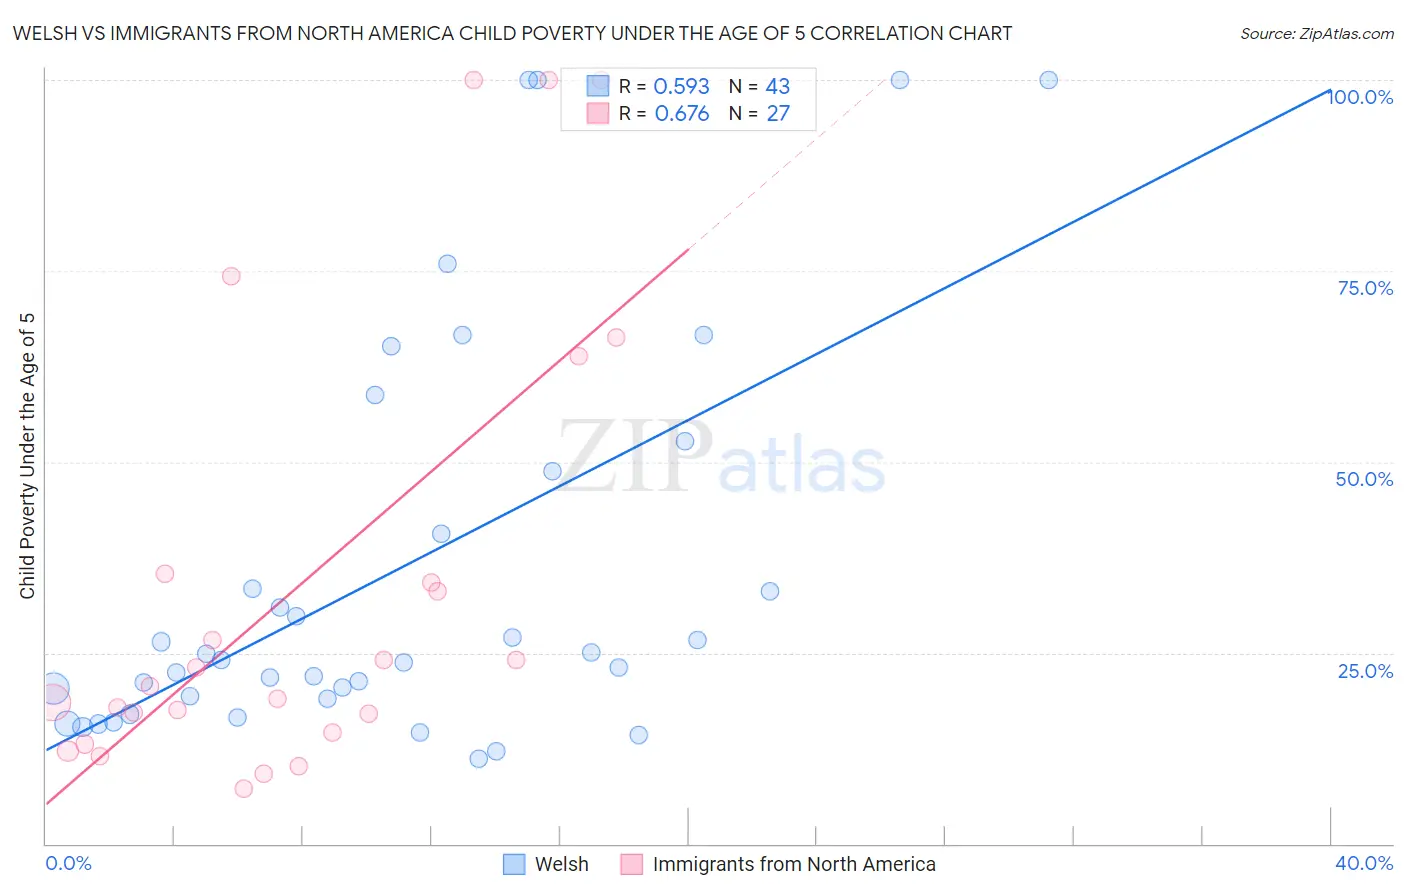 Welsh vs Immigrants from North America Child Poverty Under the Age of 5